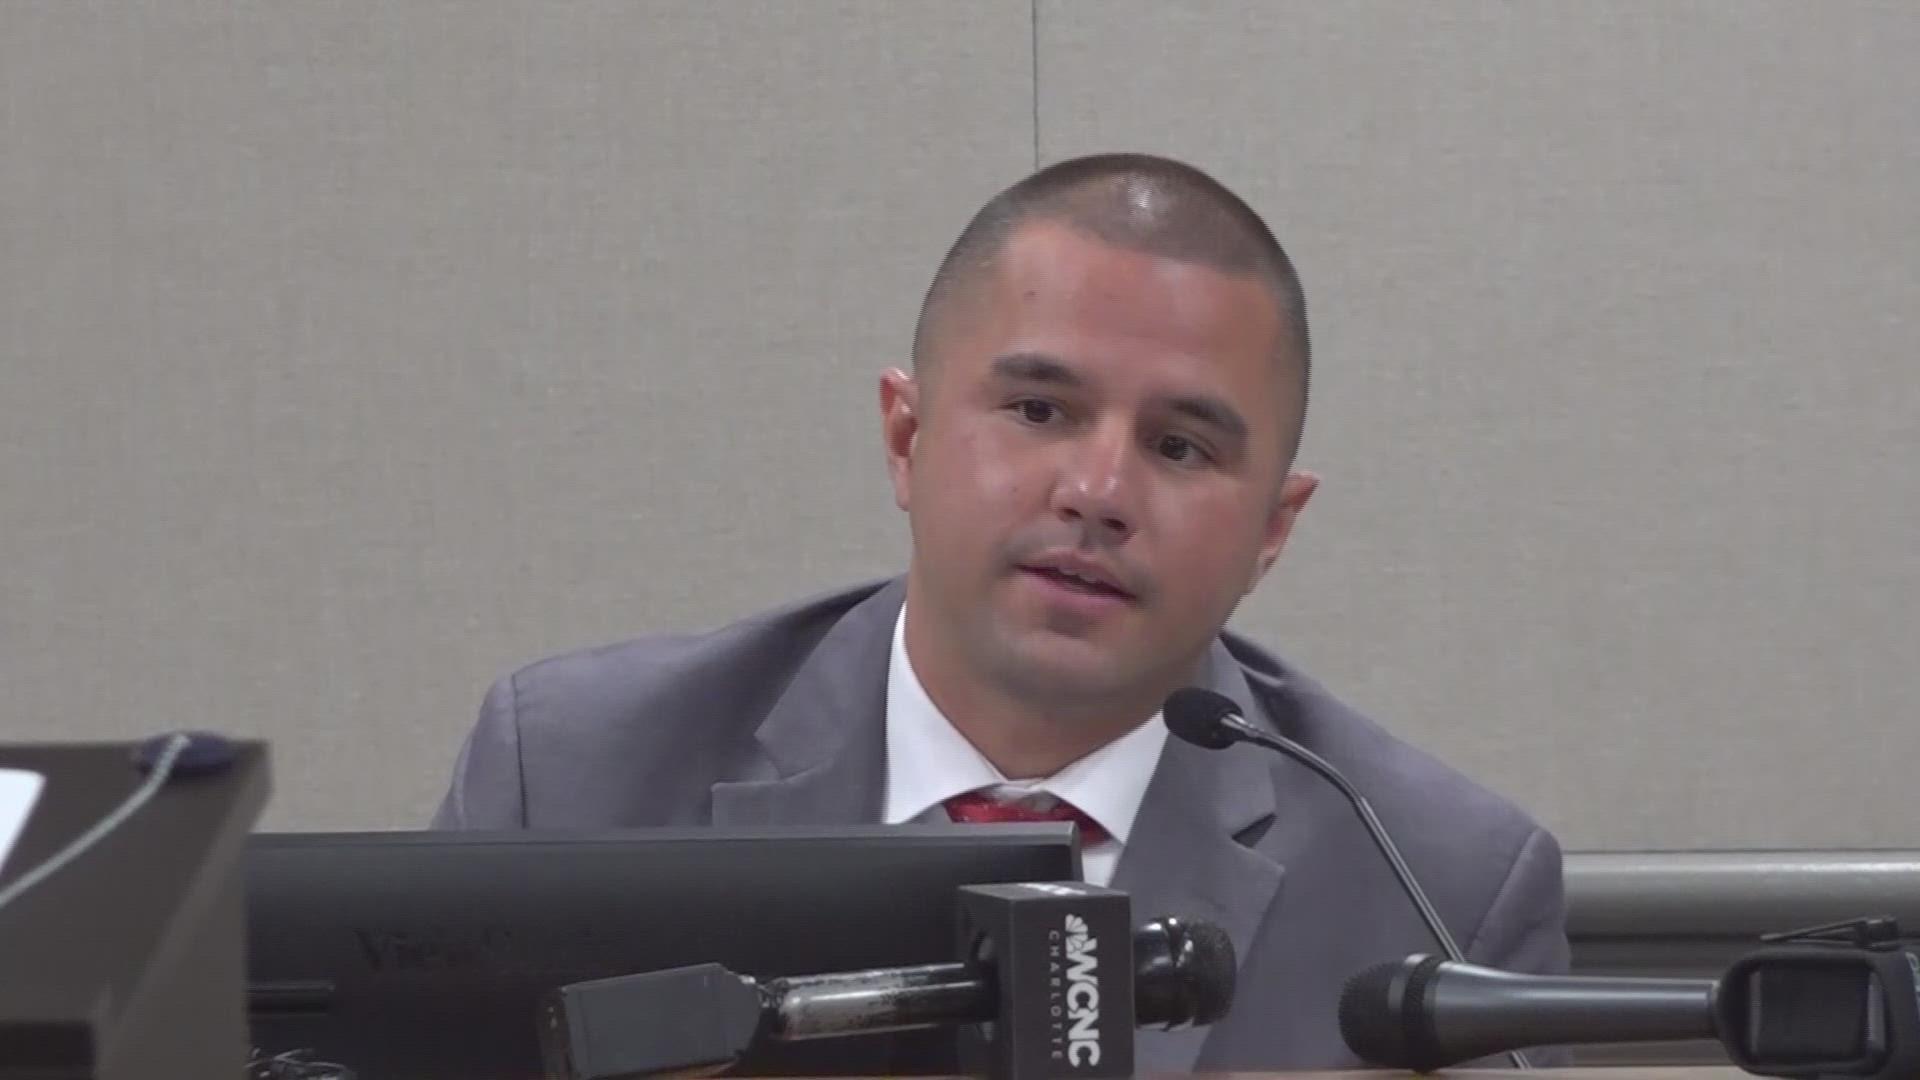 Former Rock Hill police officer Jonathan Moreno claimed in court Tuesday that he was forced to apologize publicly for his role in an arrest that led to his firing.